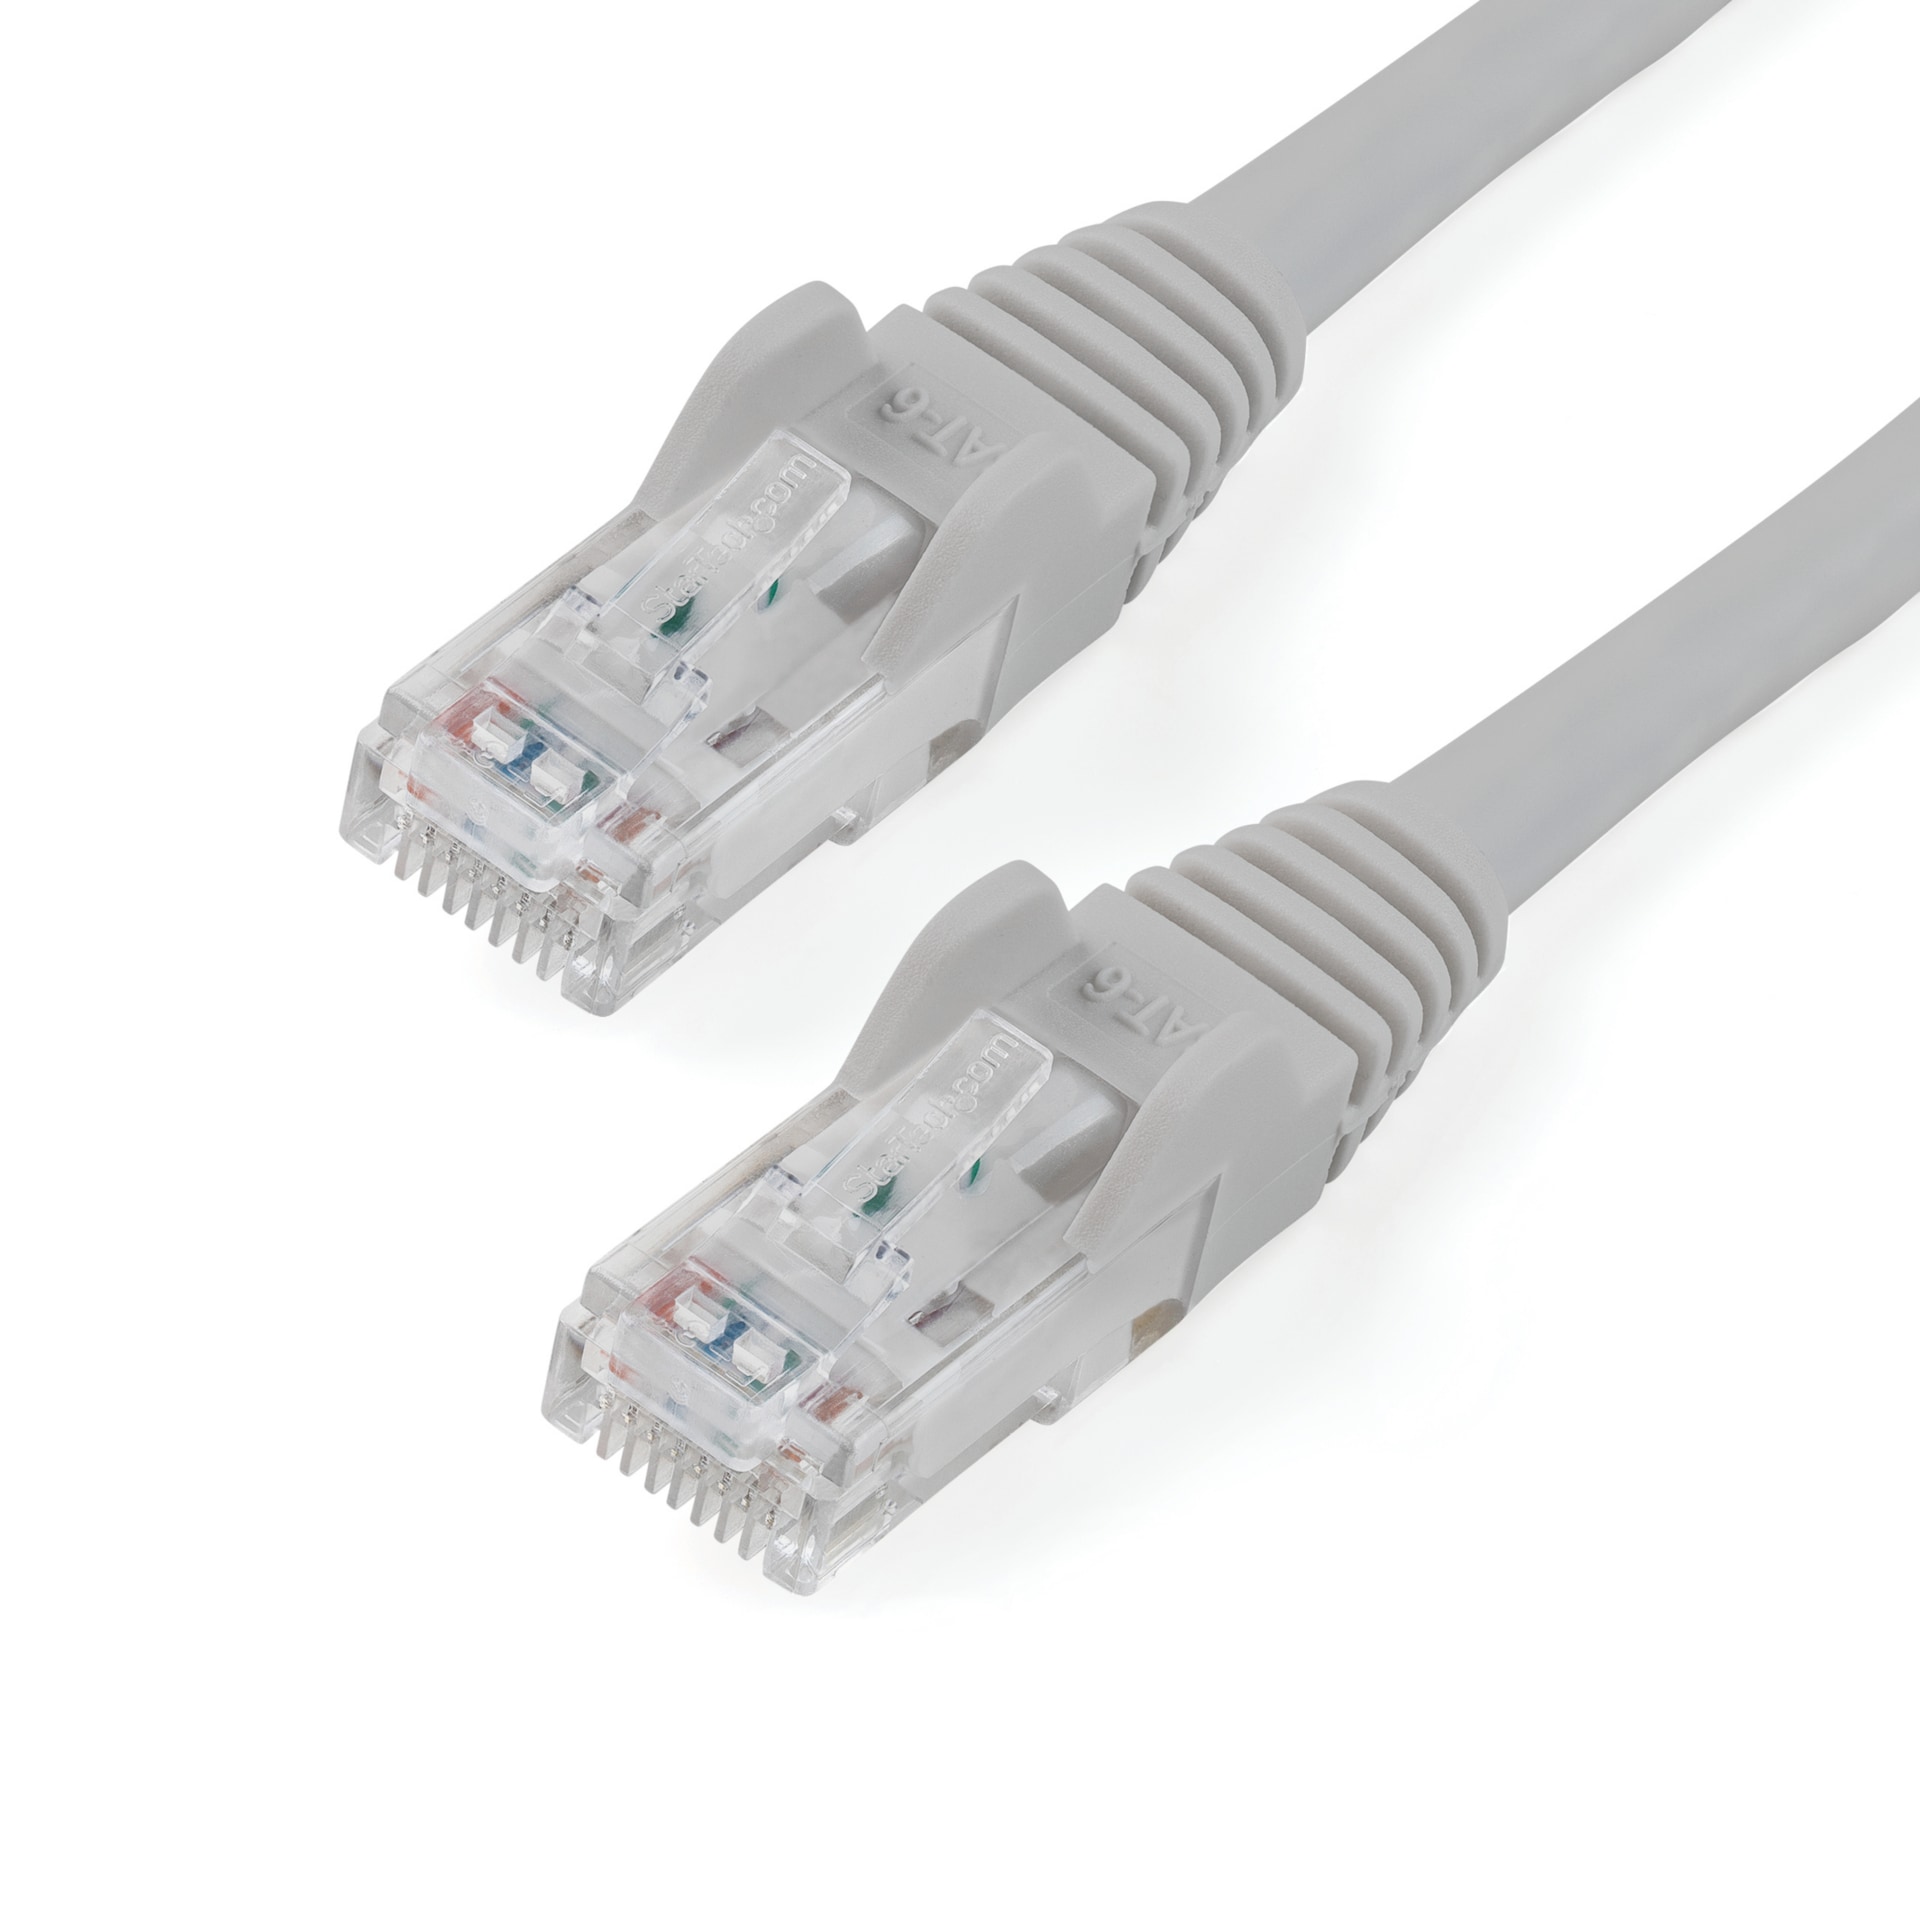 StarTech.com 1ft CAT6 Ethernet Cable Gray Snagless UTP CAT 6 Gigabit Cord/Wire 100W PoE 650MHz